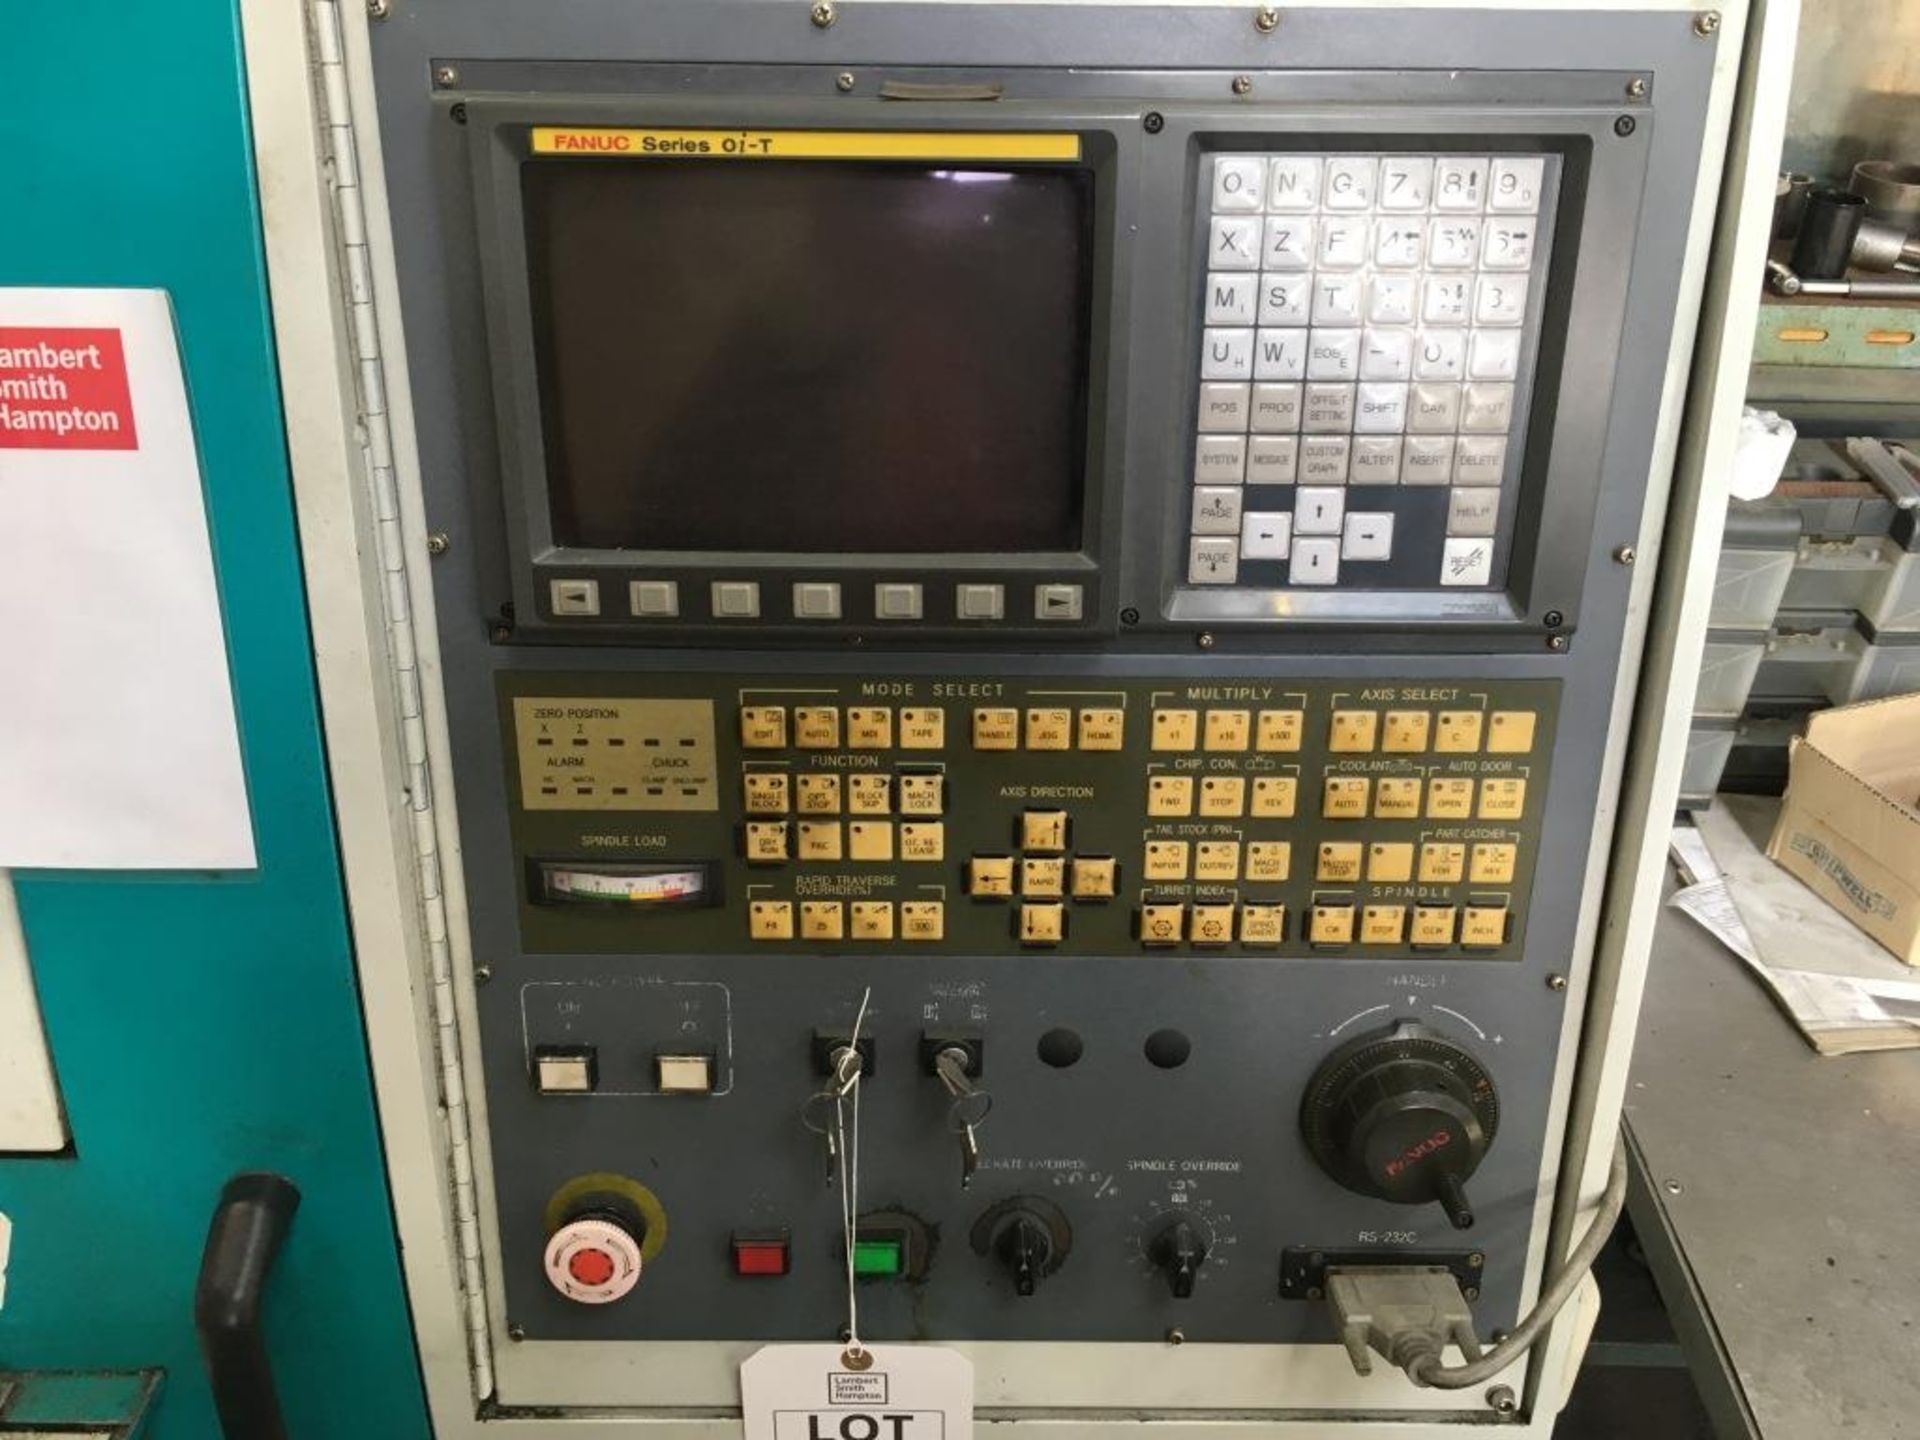 Doosan S280 CNC lathe with FANUC Series Oi-T control, 10 tool changer, Serial No. LNG-1142 with - Image 9 of 15